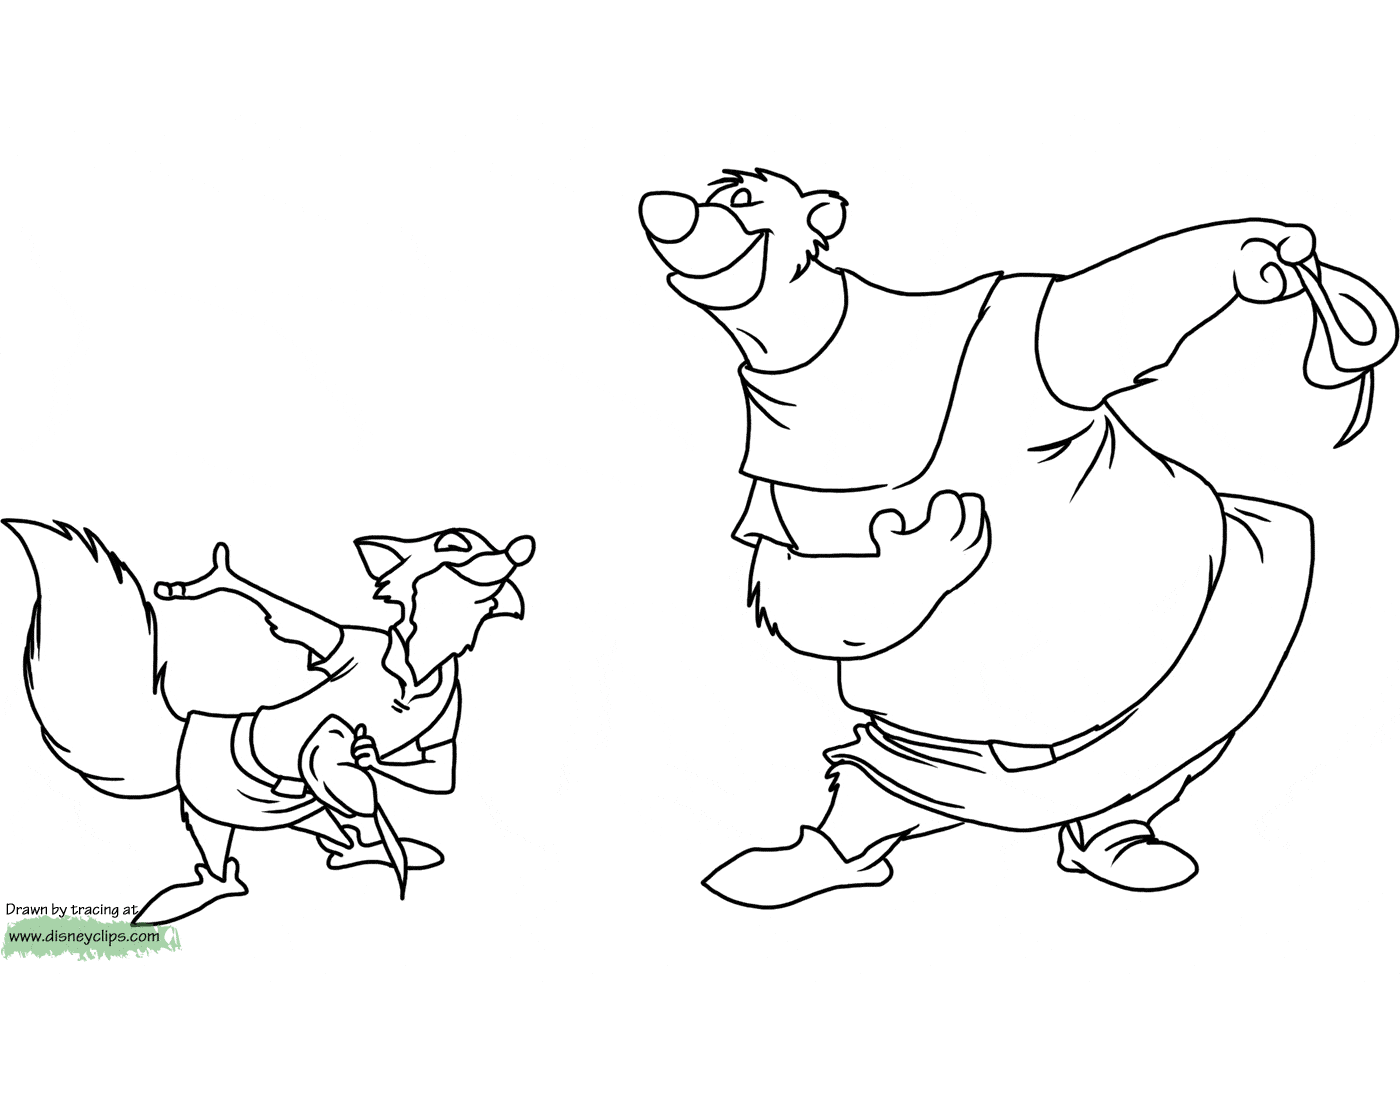 Disney's Robin Hood Coloring Pages | Disneyclips.com